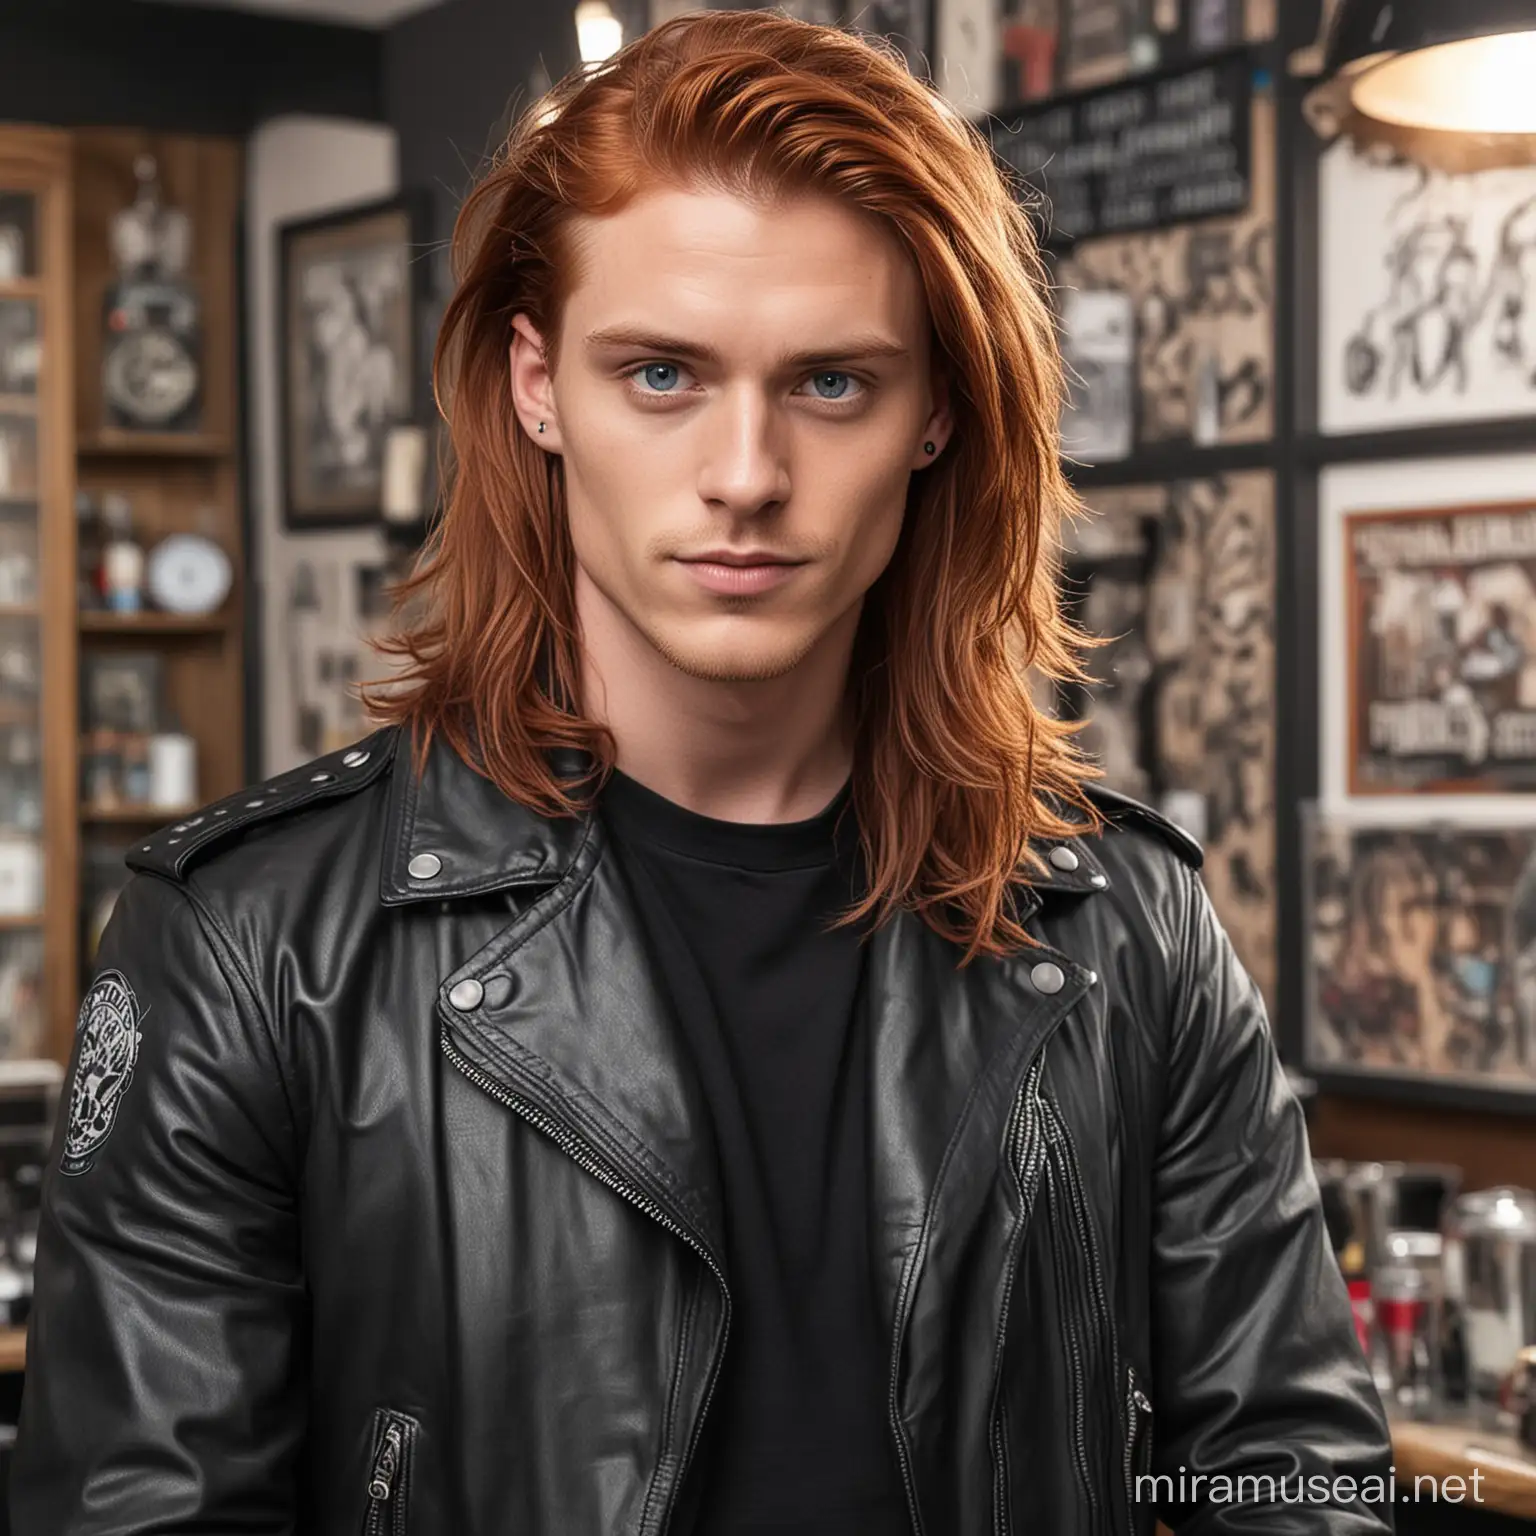 Attractive young man with long red hair, blue eyes, dressed in black and wearing a leather jacket in a tattoo shop